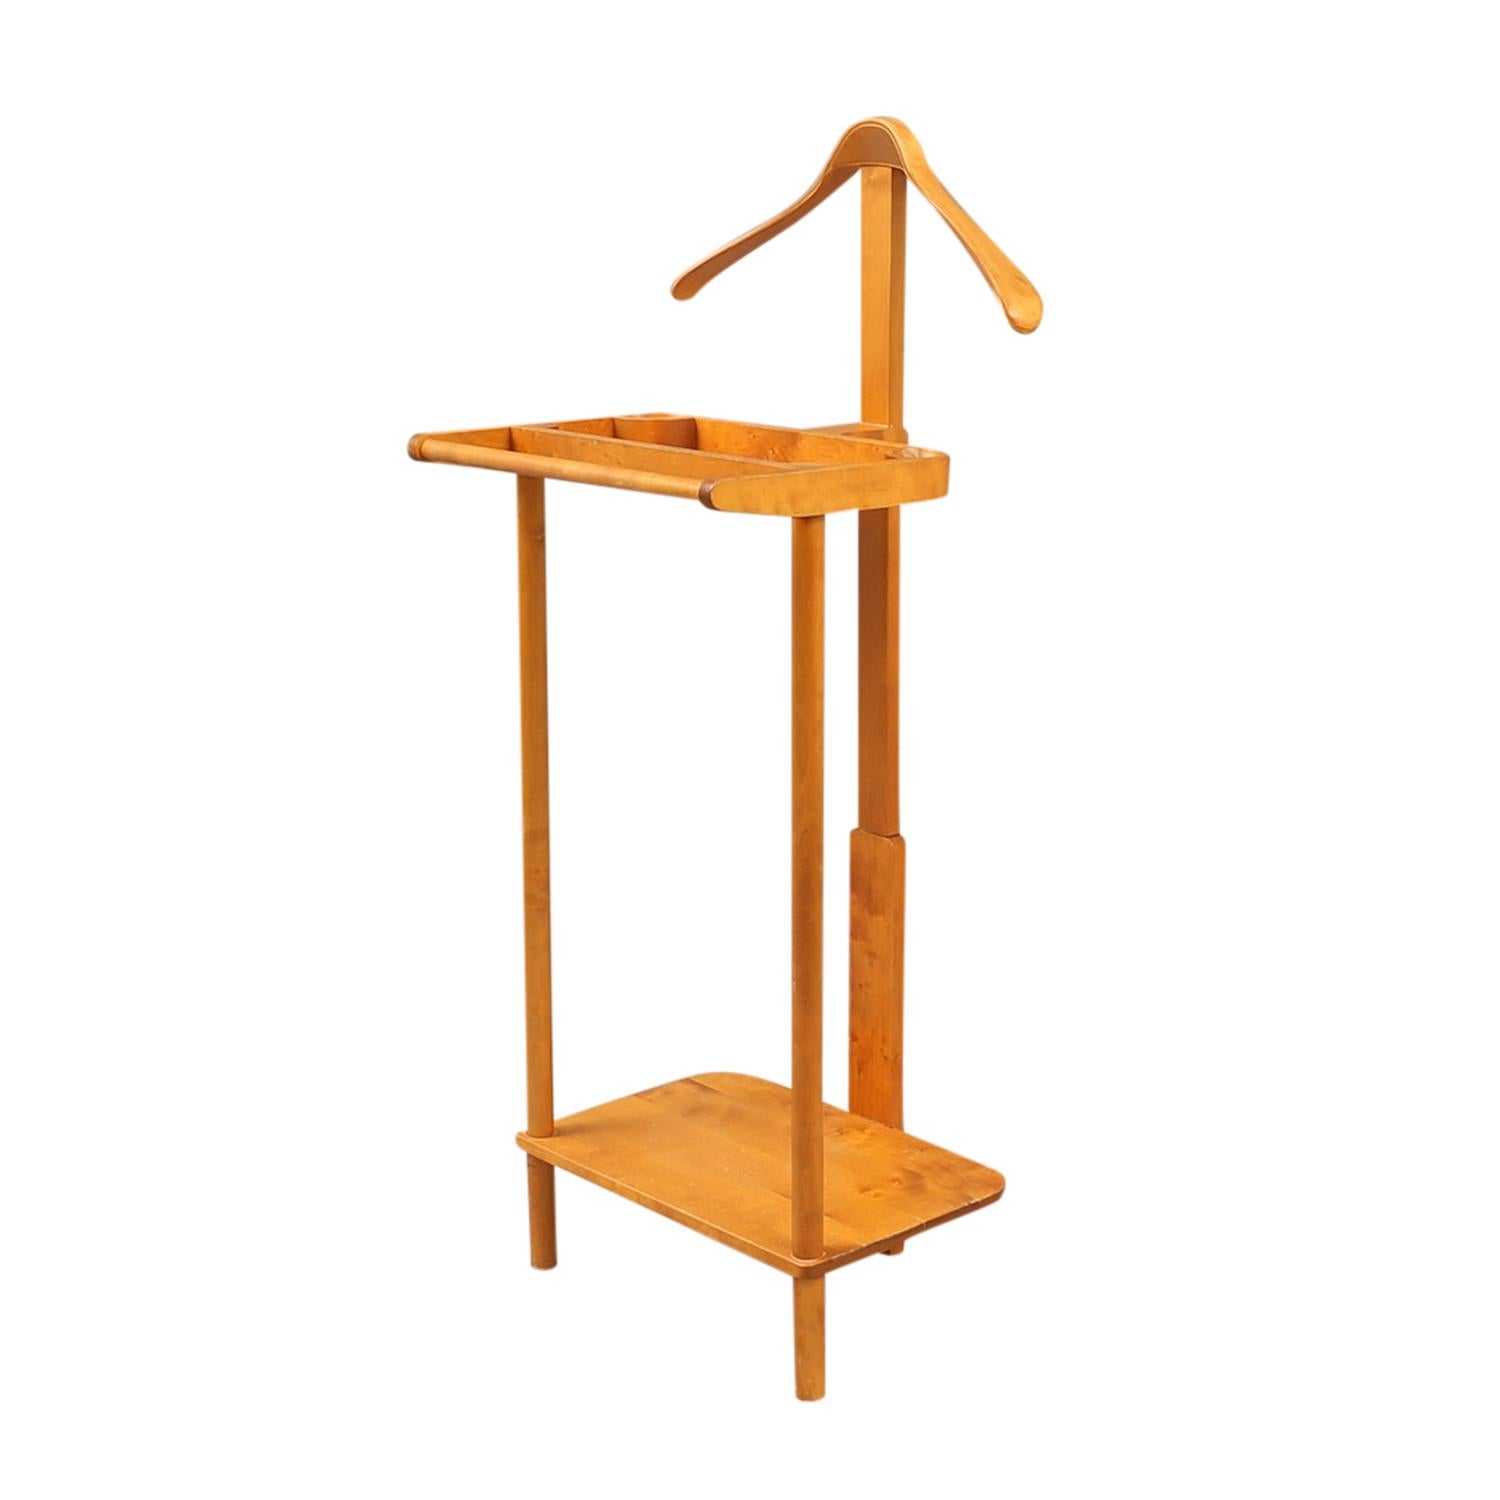 An original Mid-Century Modern Swedish officer clothes stand made of hand carafted polished Birchwood, designed and produced by Threemen & AB Diö Möbelindustri. The vintage Scandinavian clothes rack is composed of a shirt stand and a rail to hang